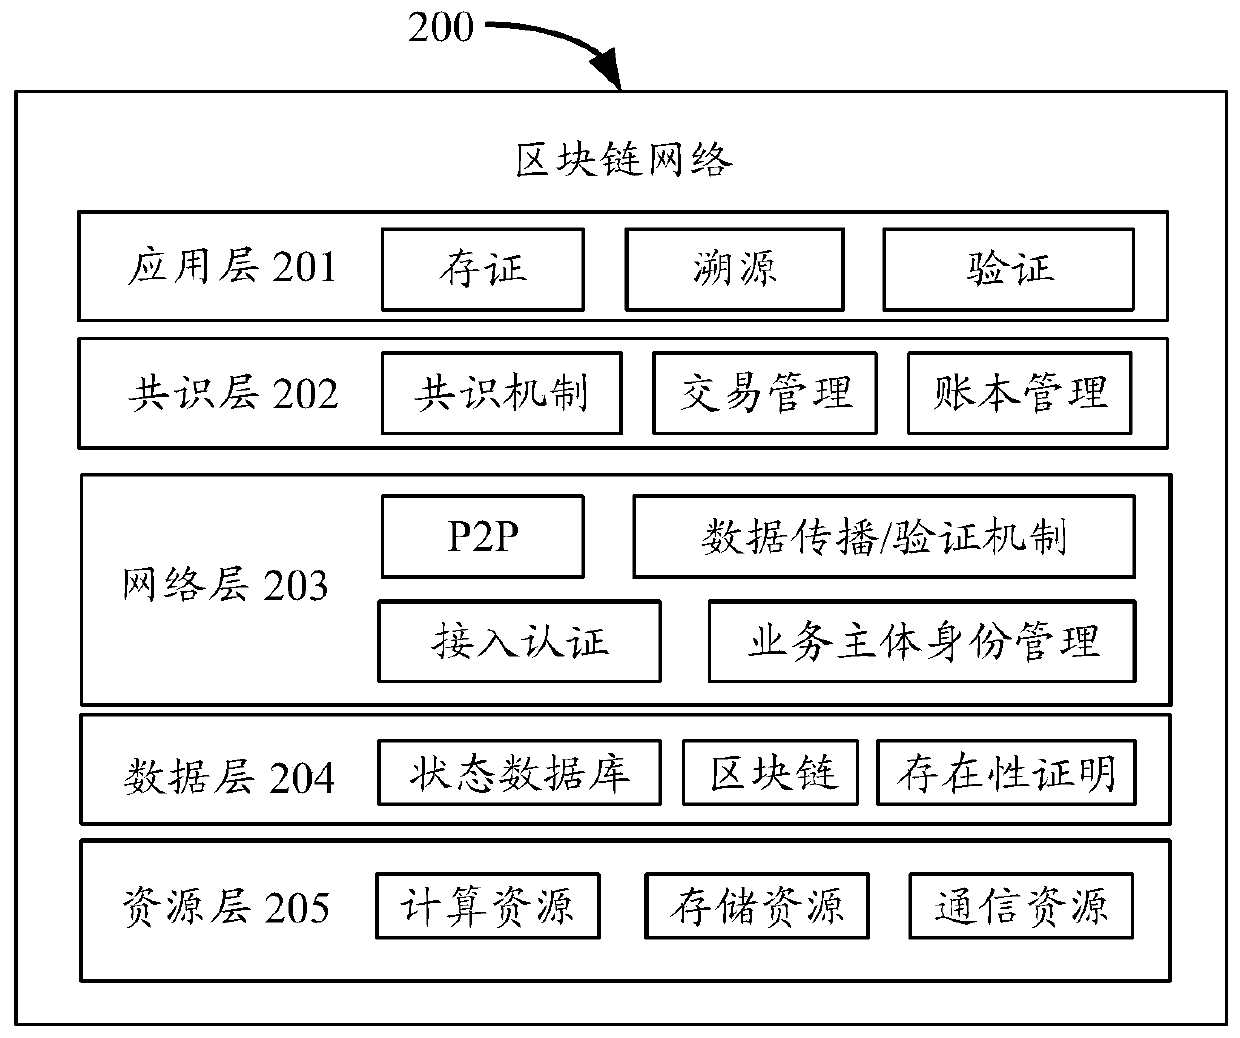 Application comment information processing method and device based on block chain network